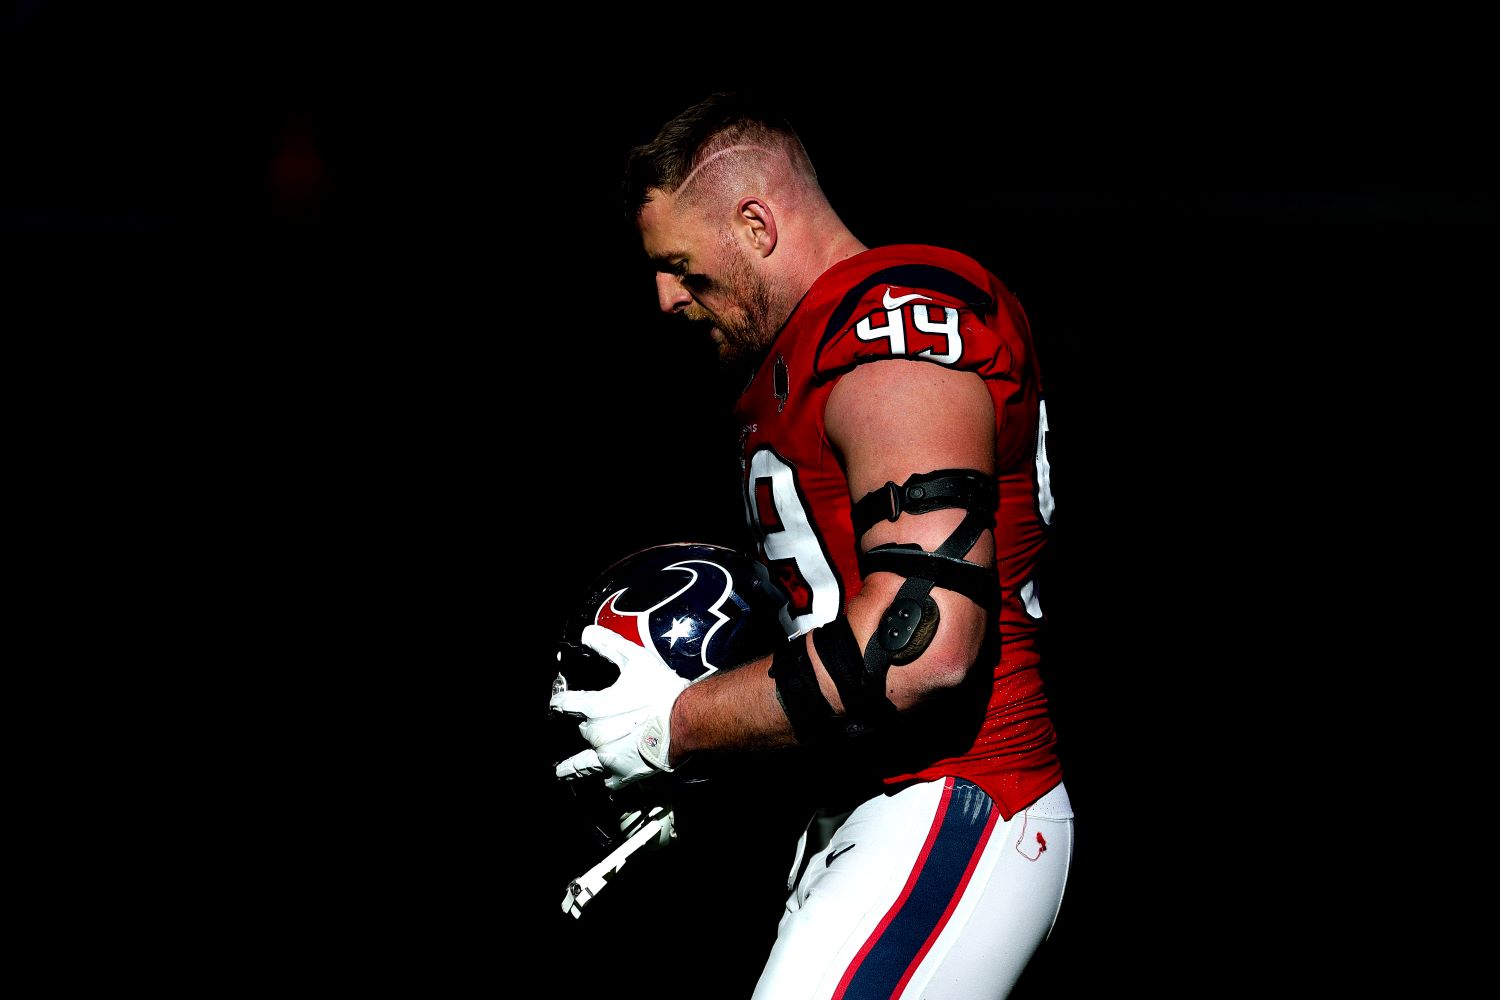 J.J. Watt of the Houston Texans looks on against the Indianapolis Colts at NRG Stadium on December 06, 2020 in Houston, Texas.